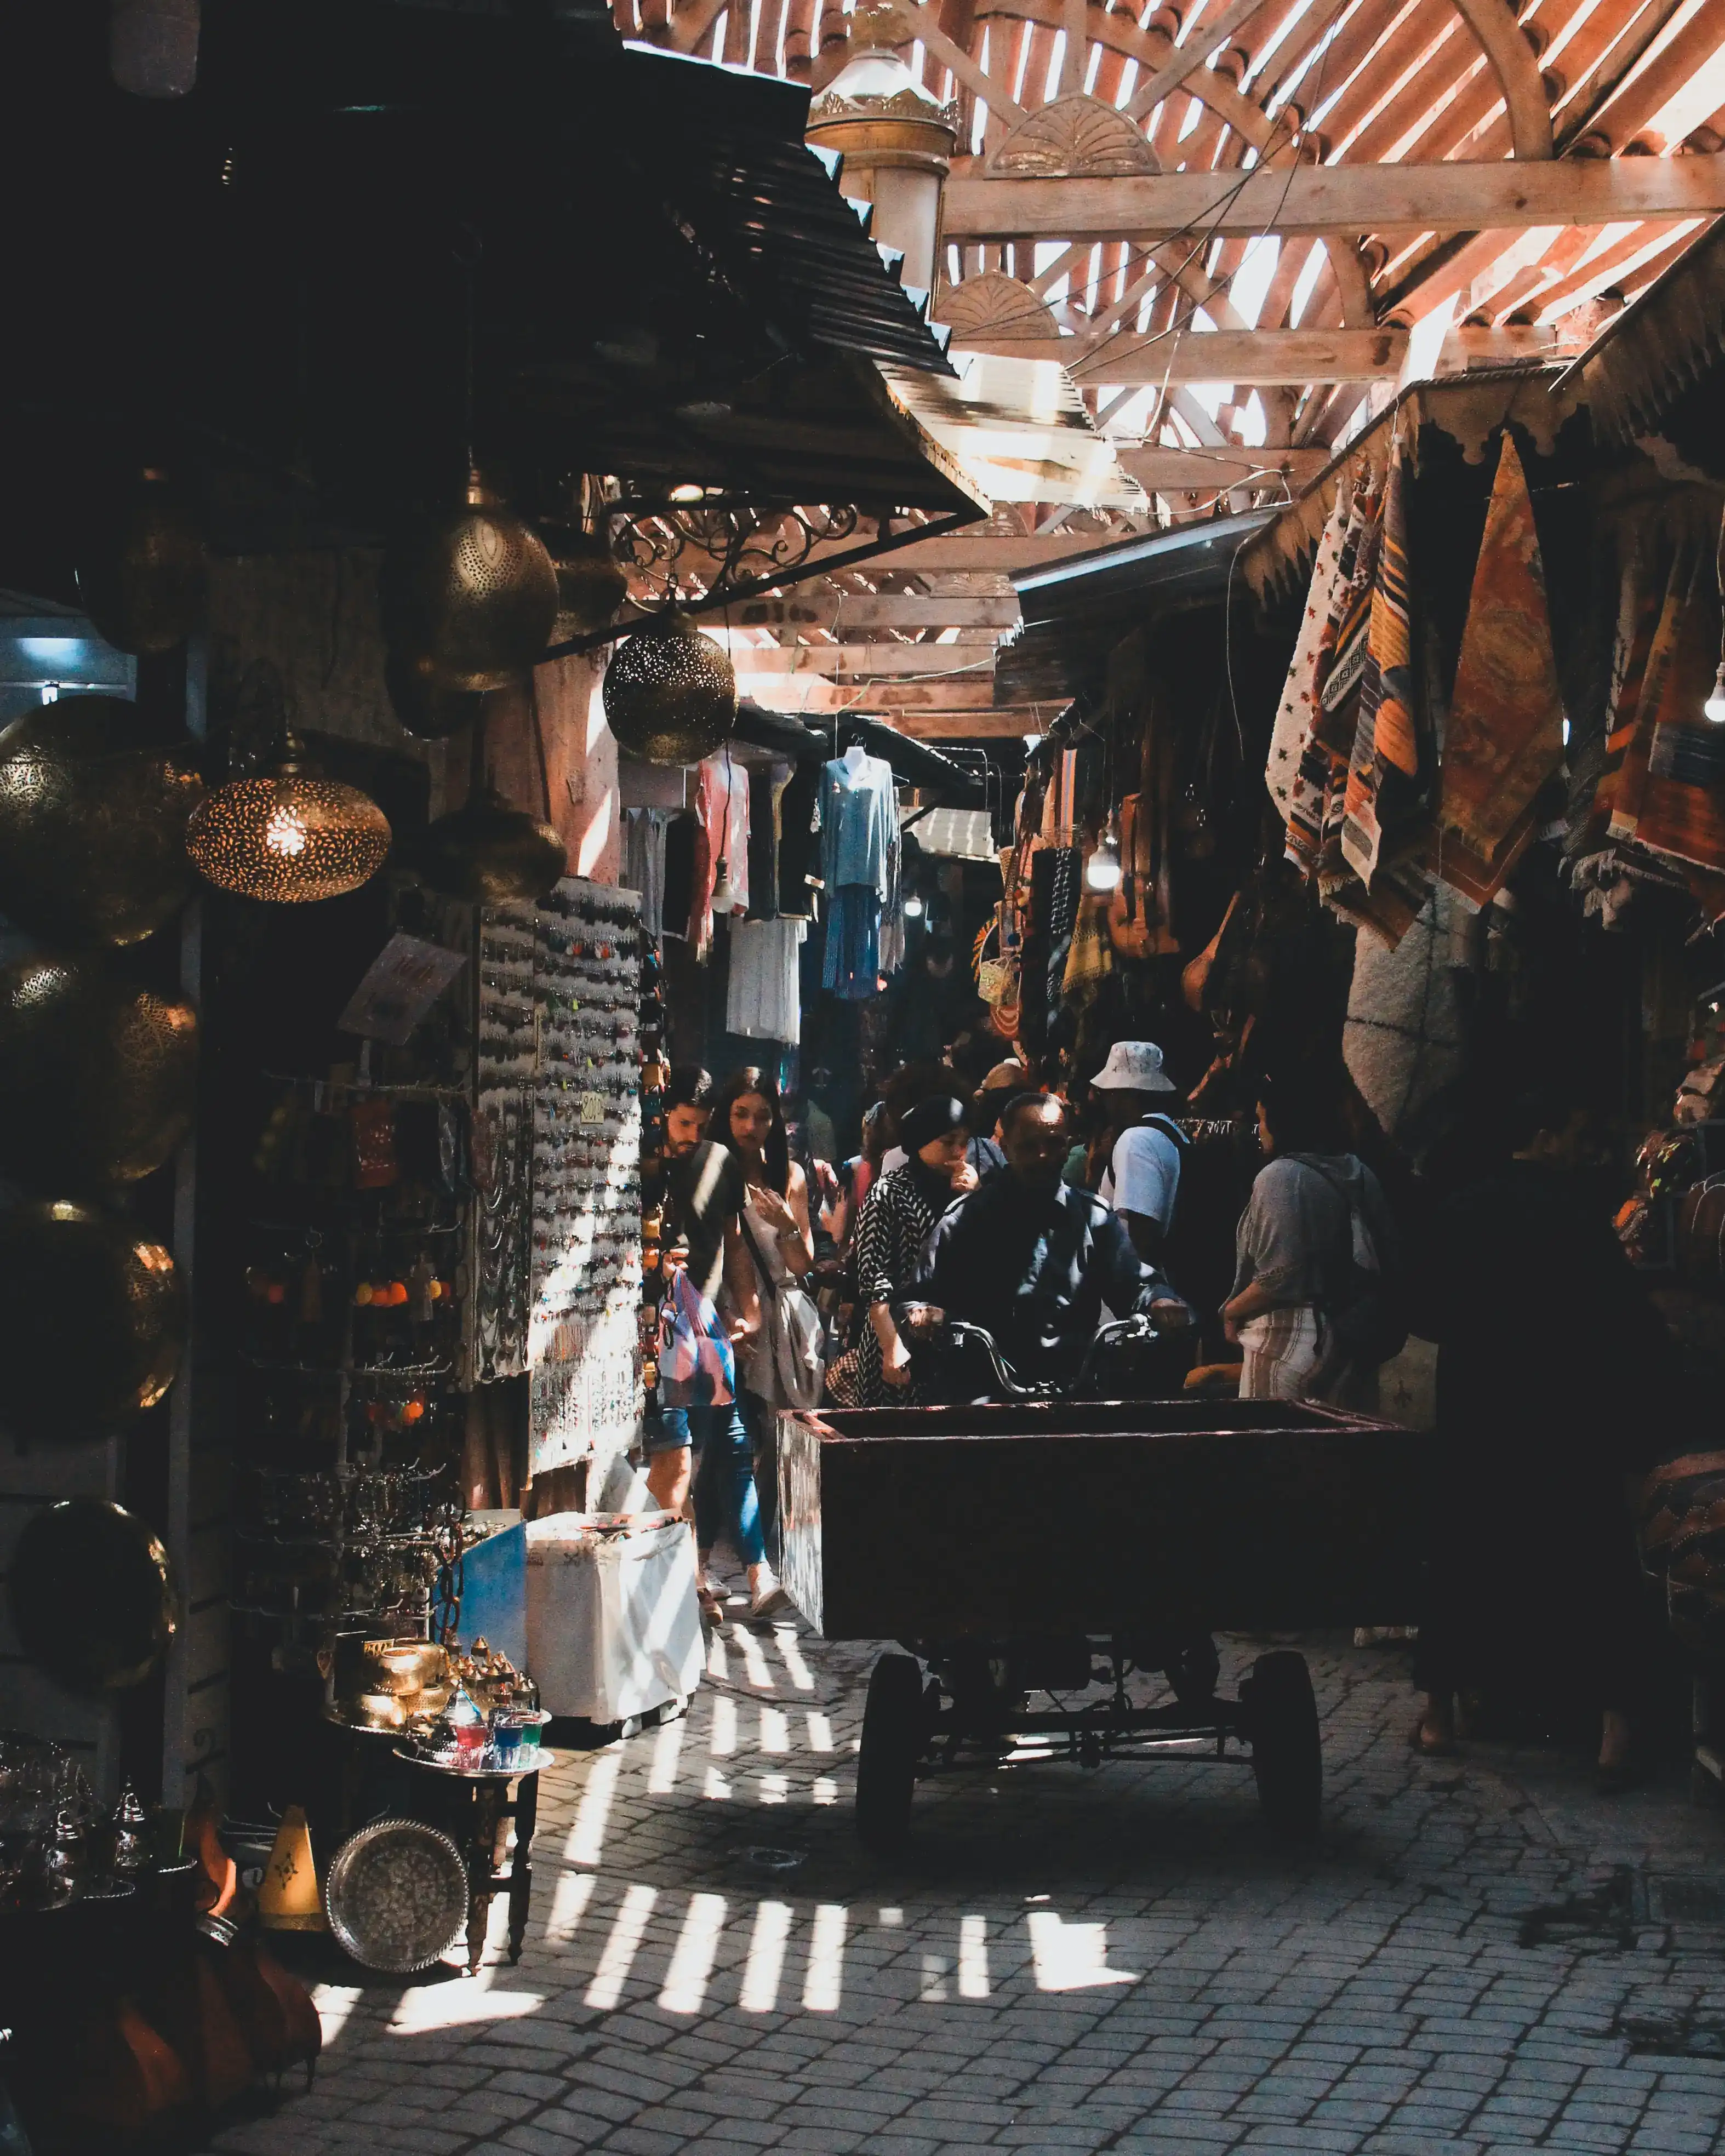 Confidential place in the souk of Marrakech